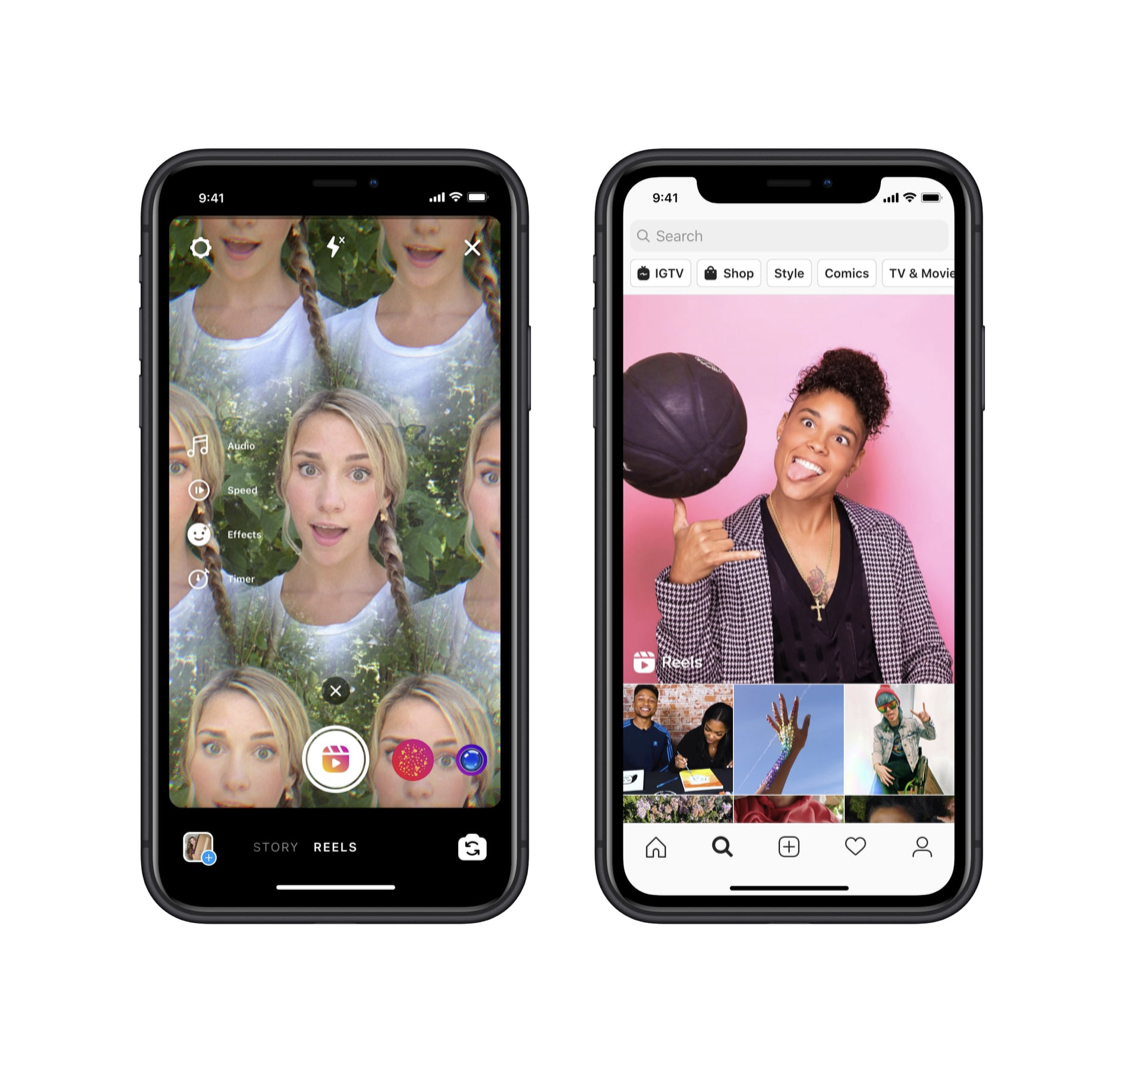 Instagram introduces 'Reels' to its users amid talk of a possible TikTok ban in the US 8